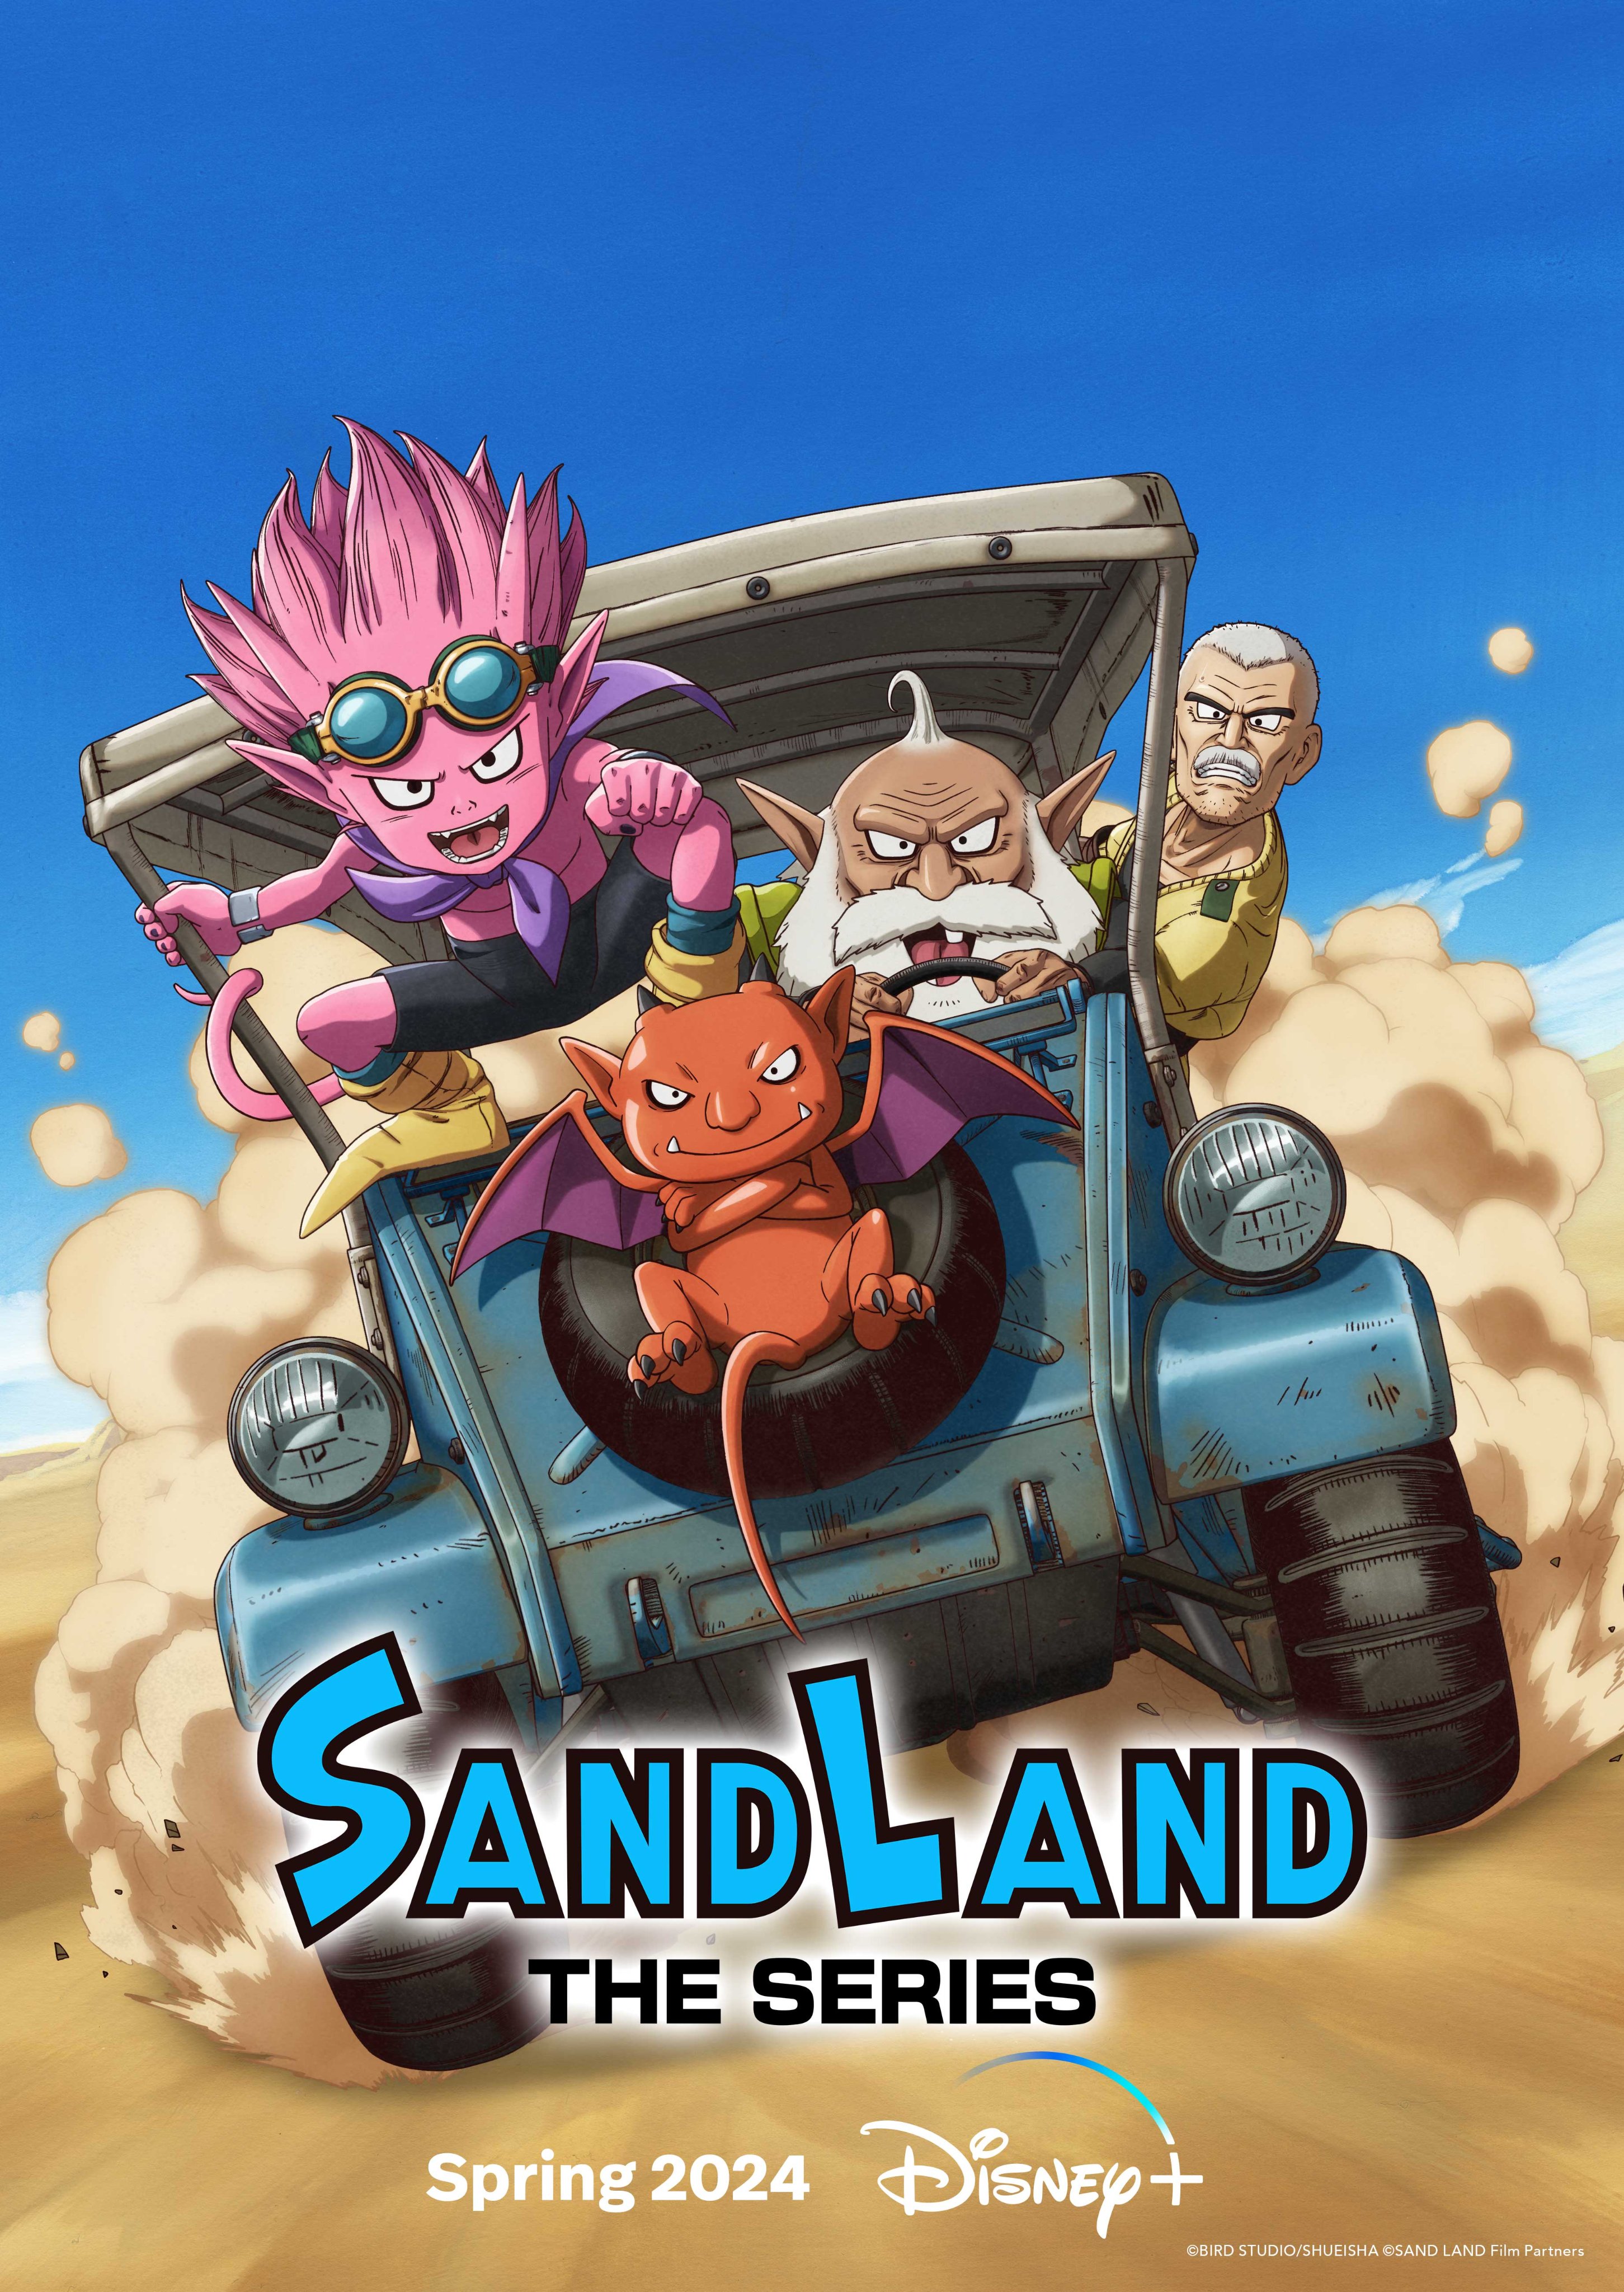 Dragon Ball Creator's Sand Land Is Getting a PS5, PS4 Game